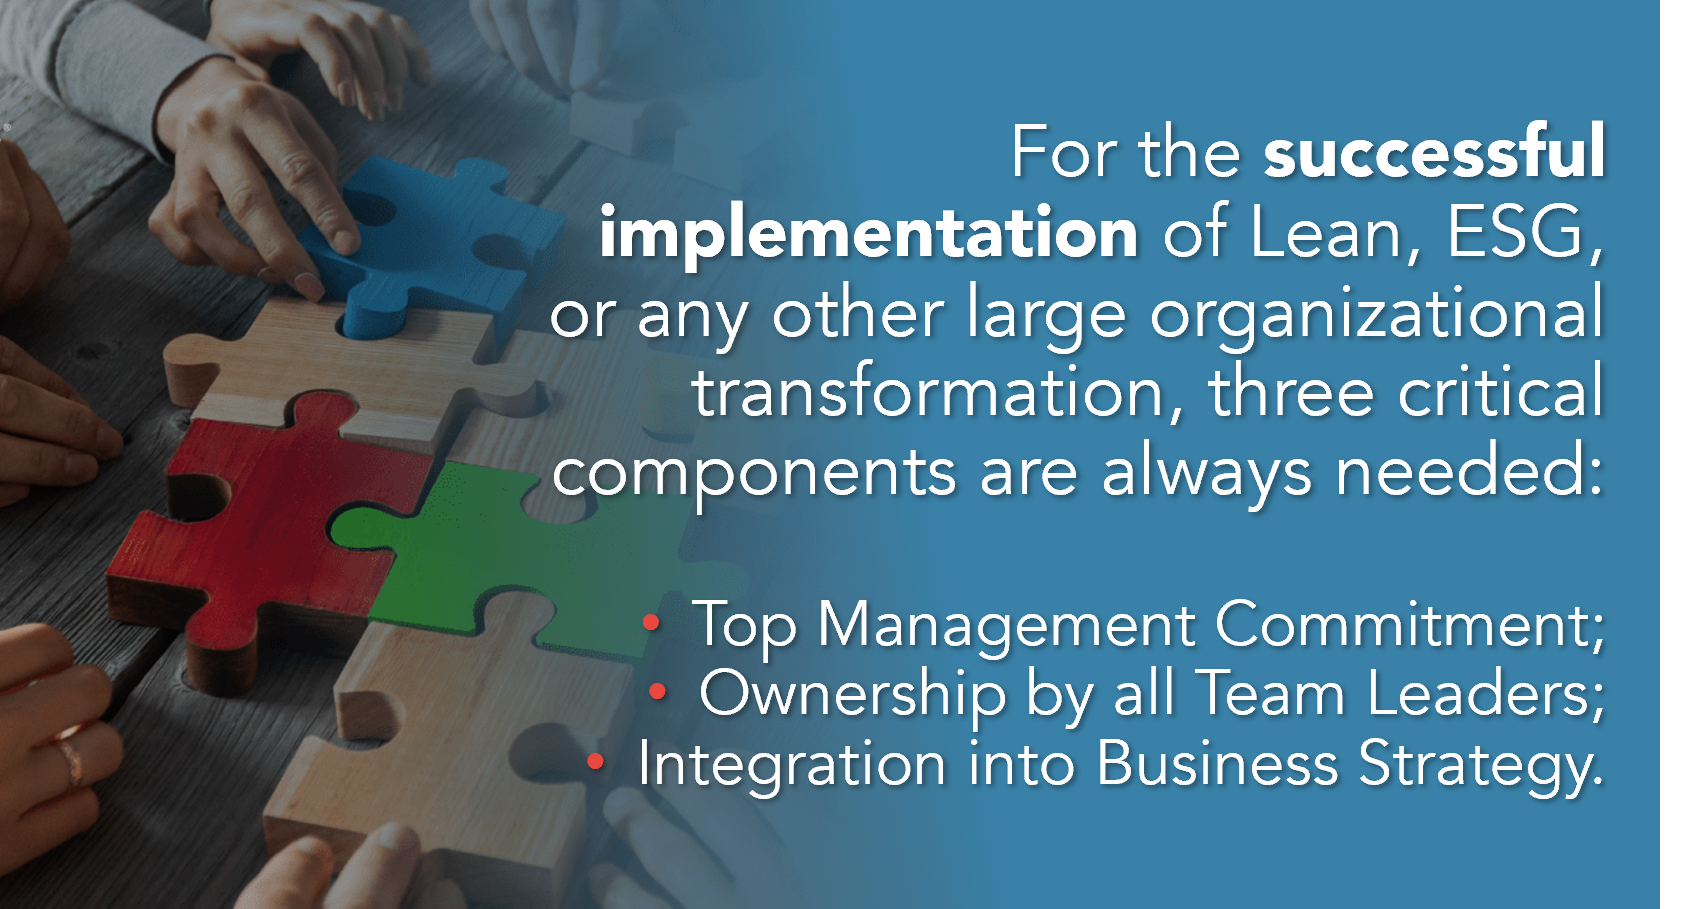 Critical components of successful implementation of Lean and ESG:
1. Top Management Commitment
2. Ownership by all Team Leaders
3. Integration into Business Strategy